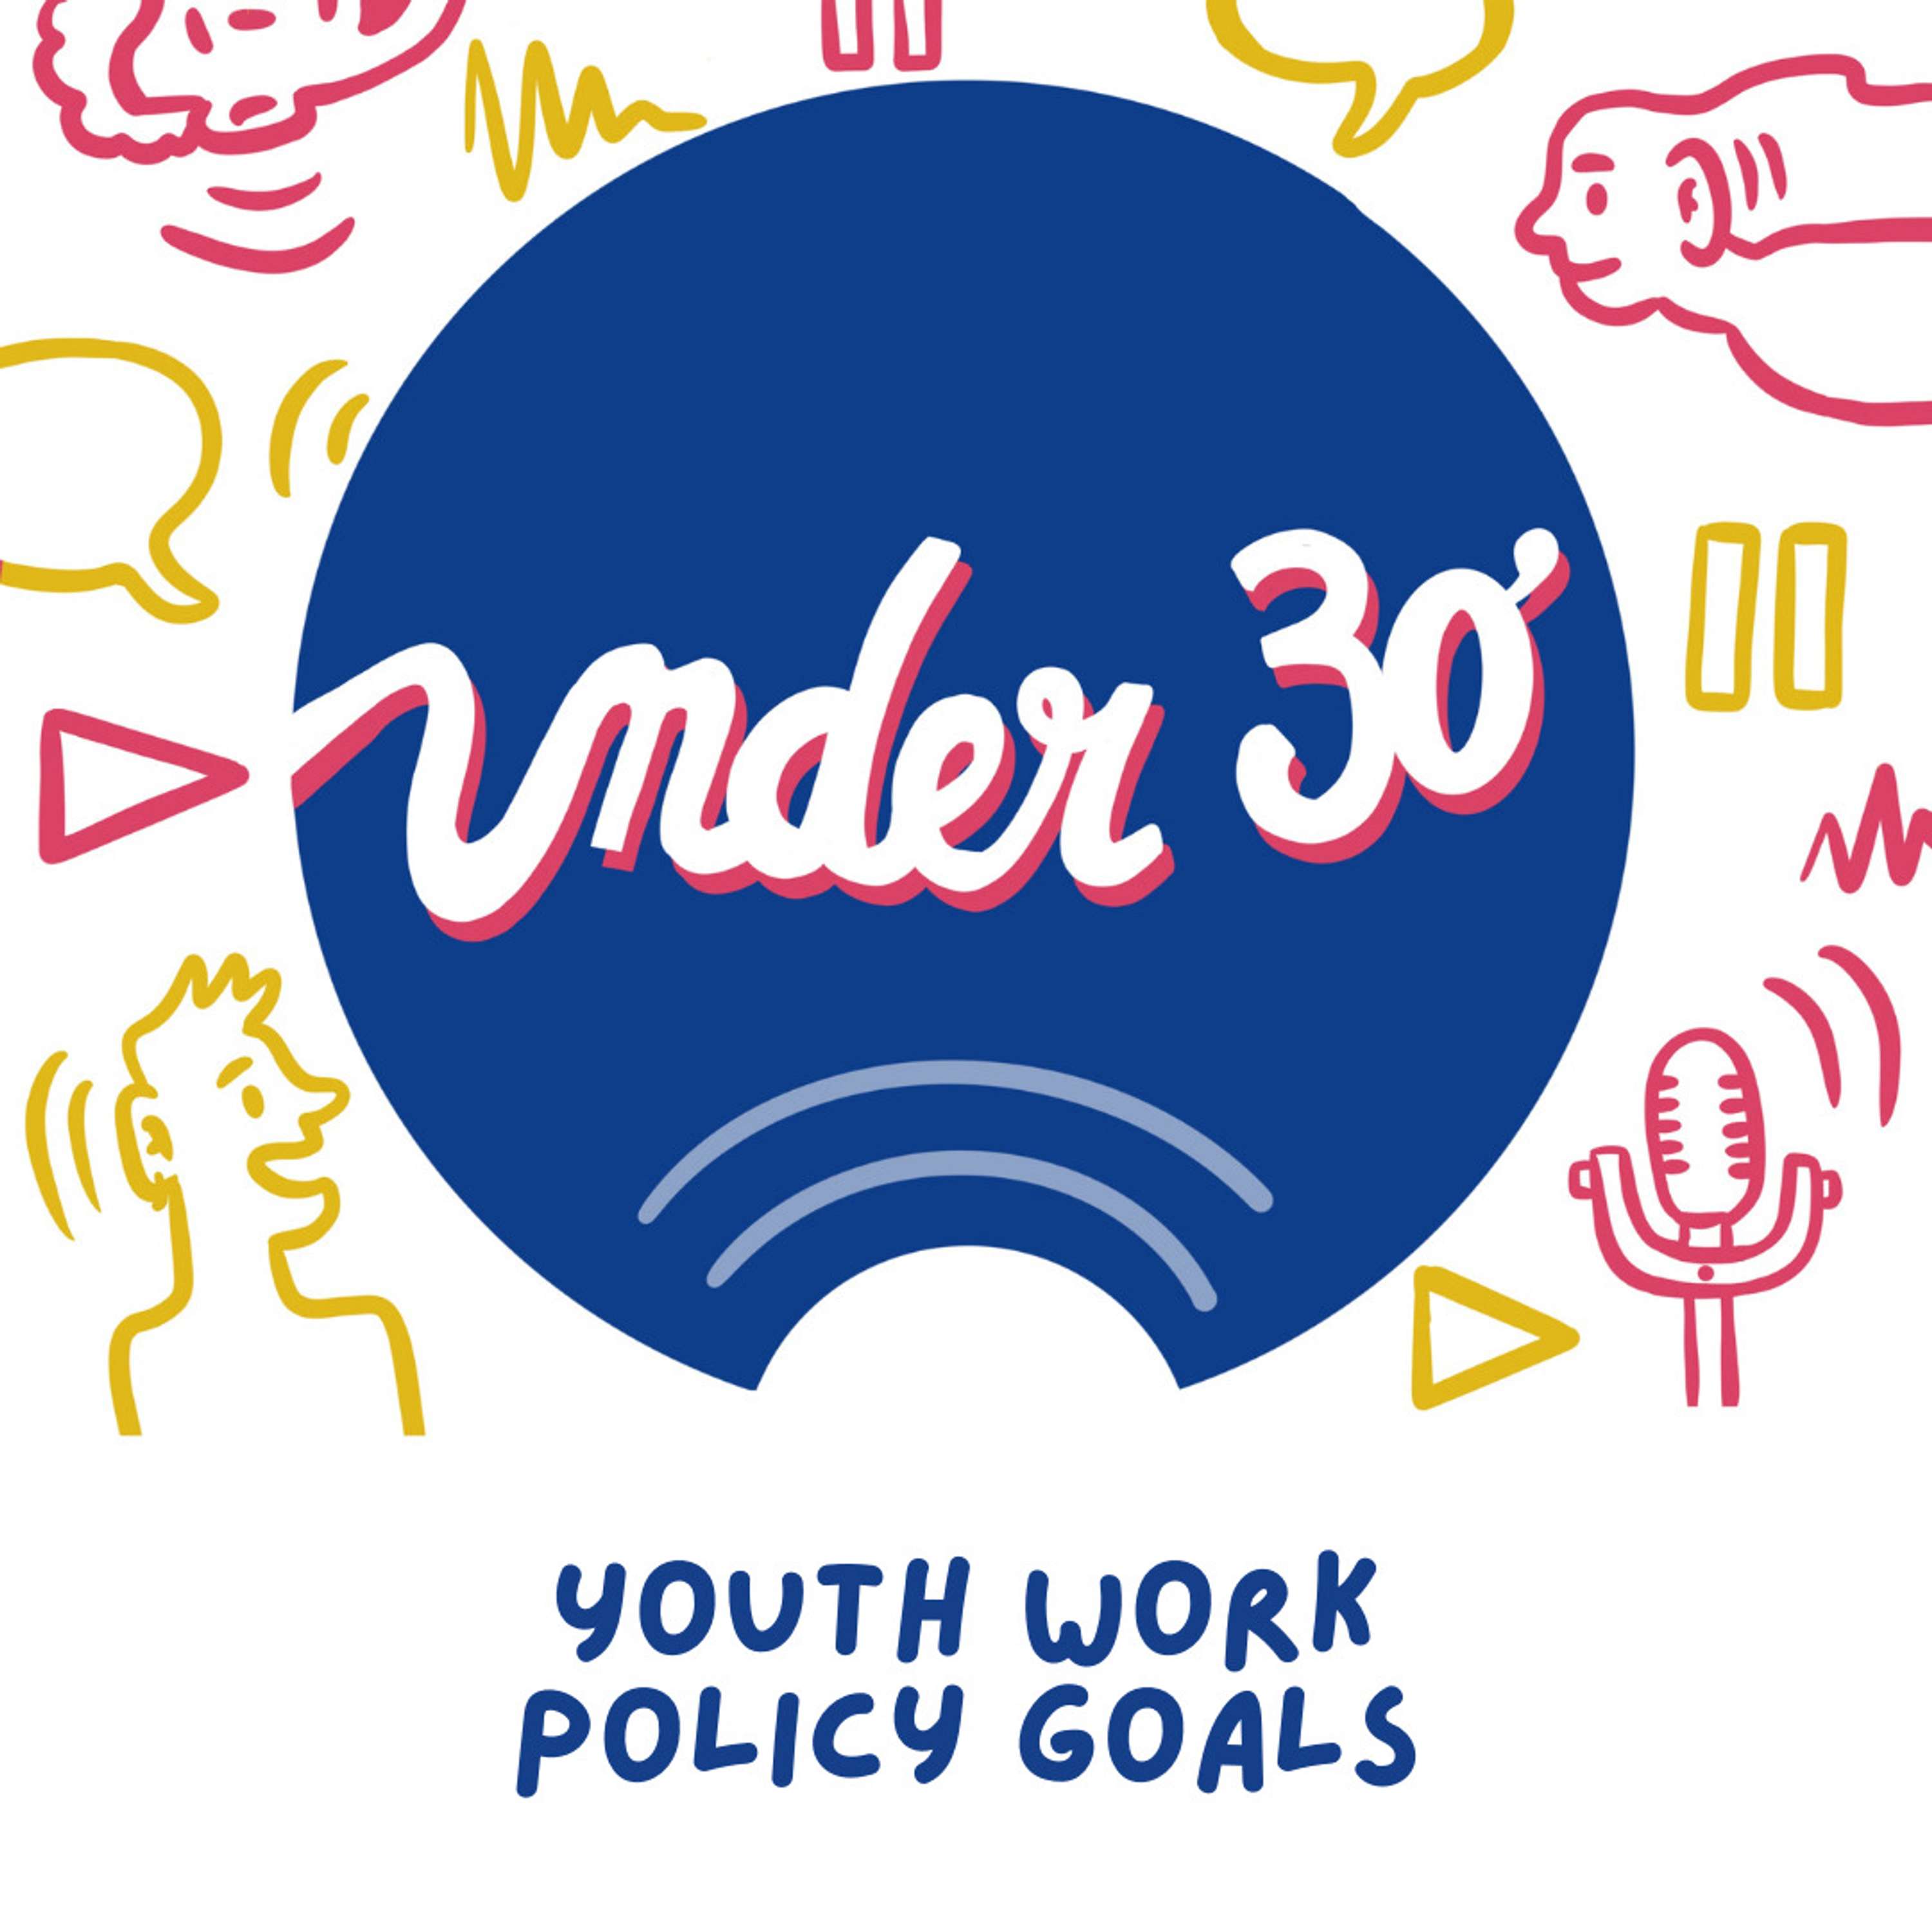 Youth work policy goals